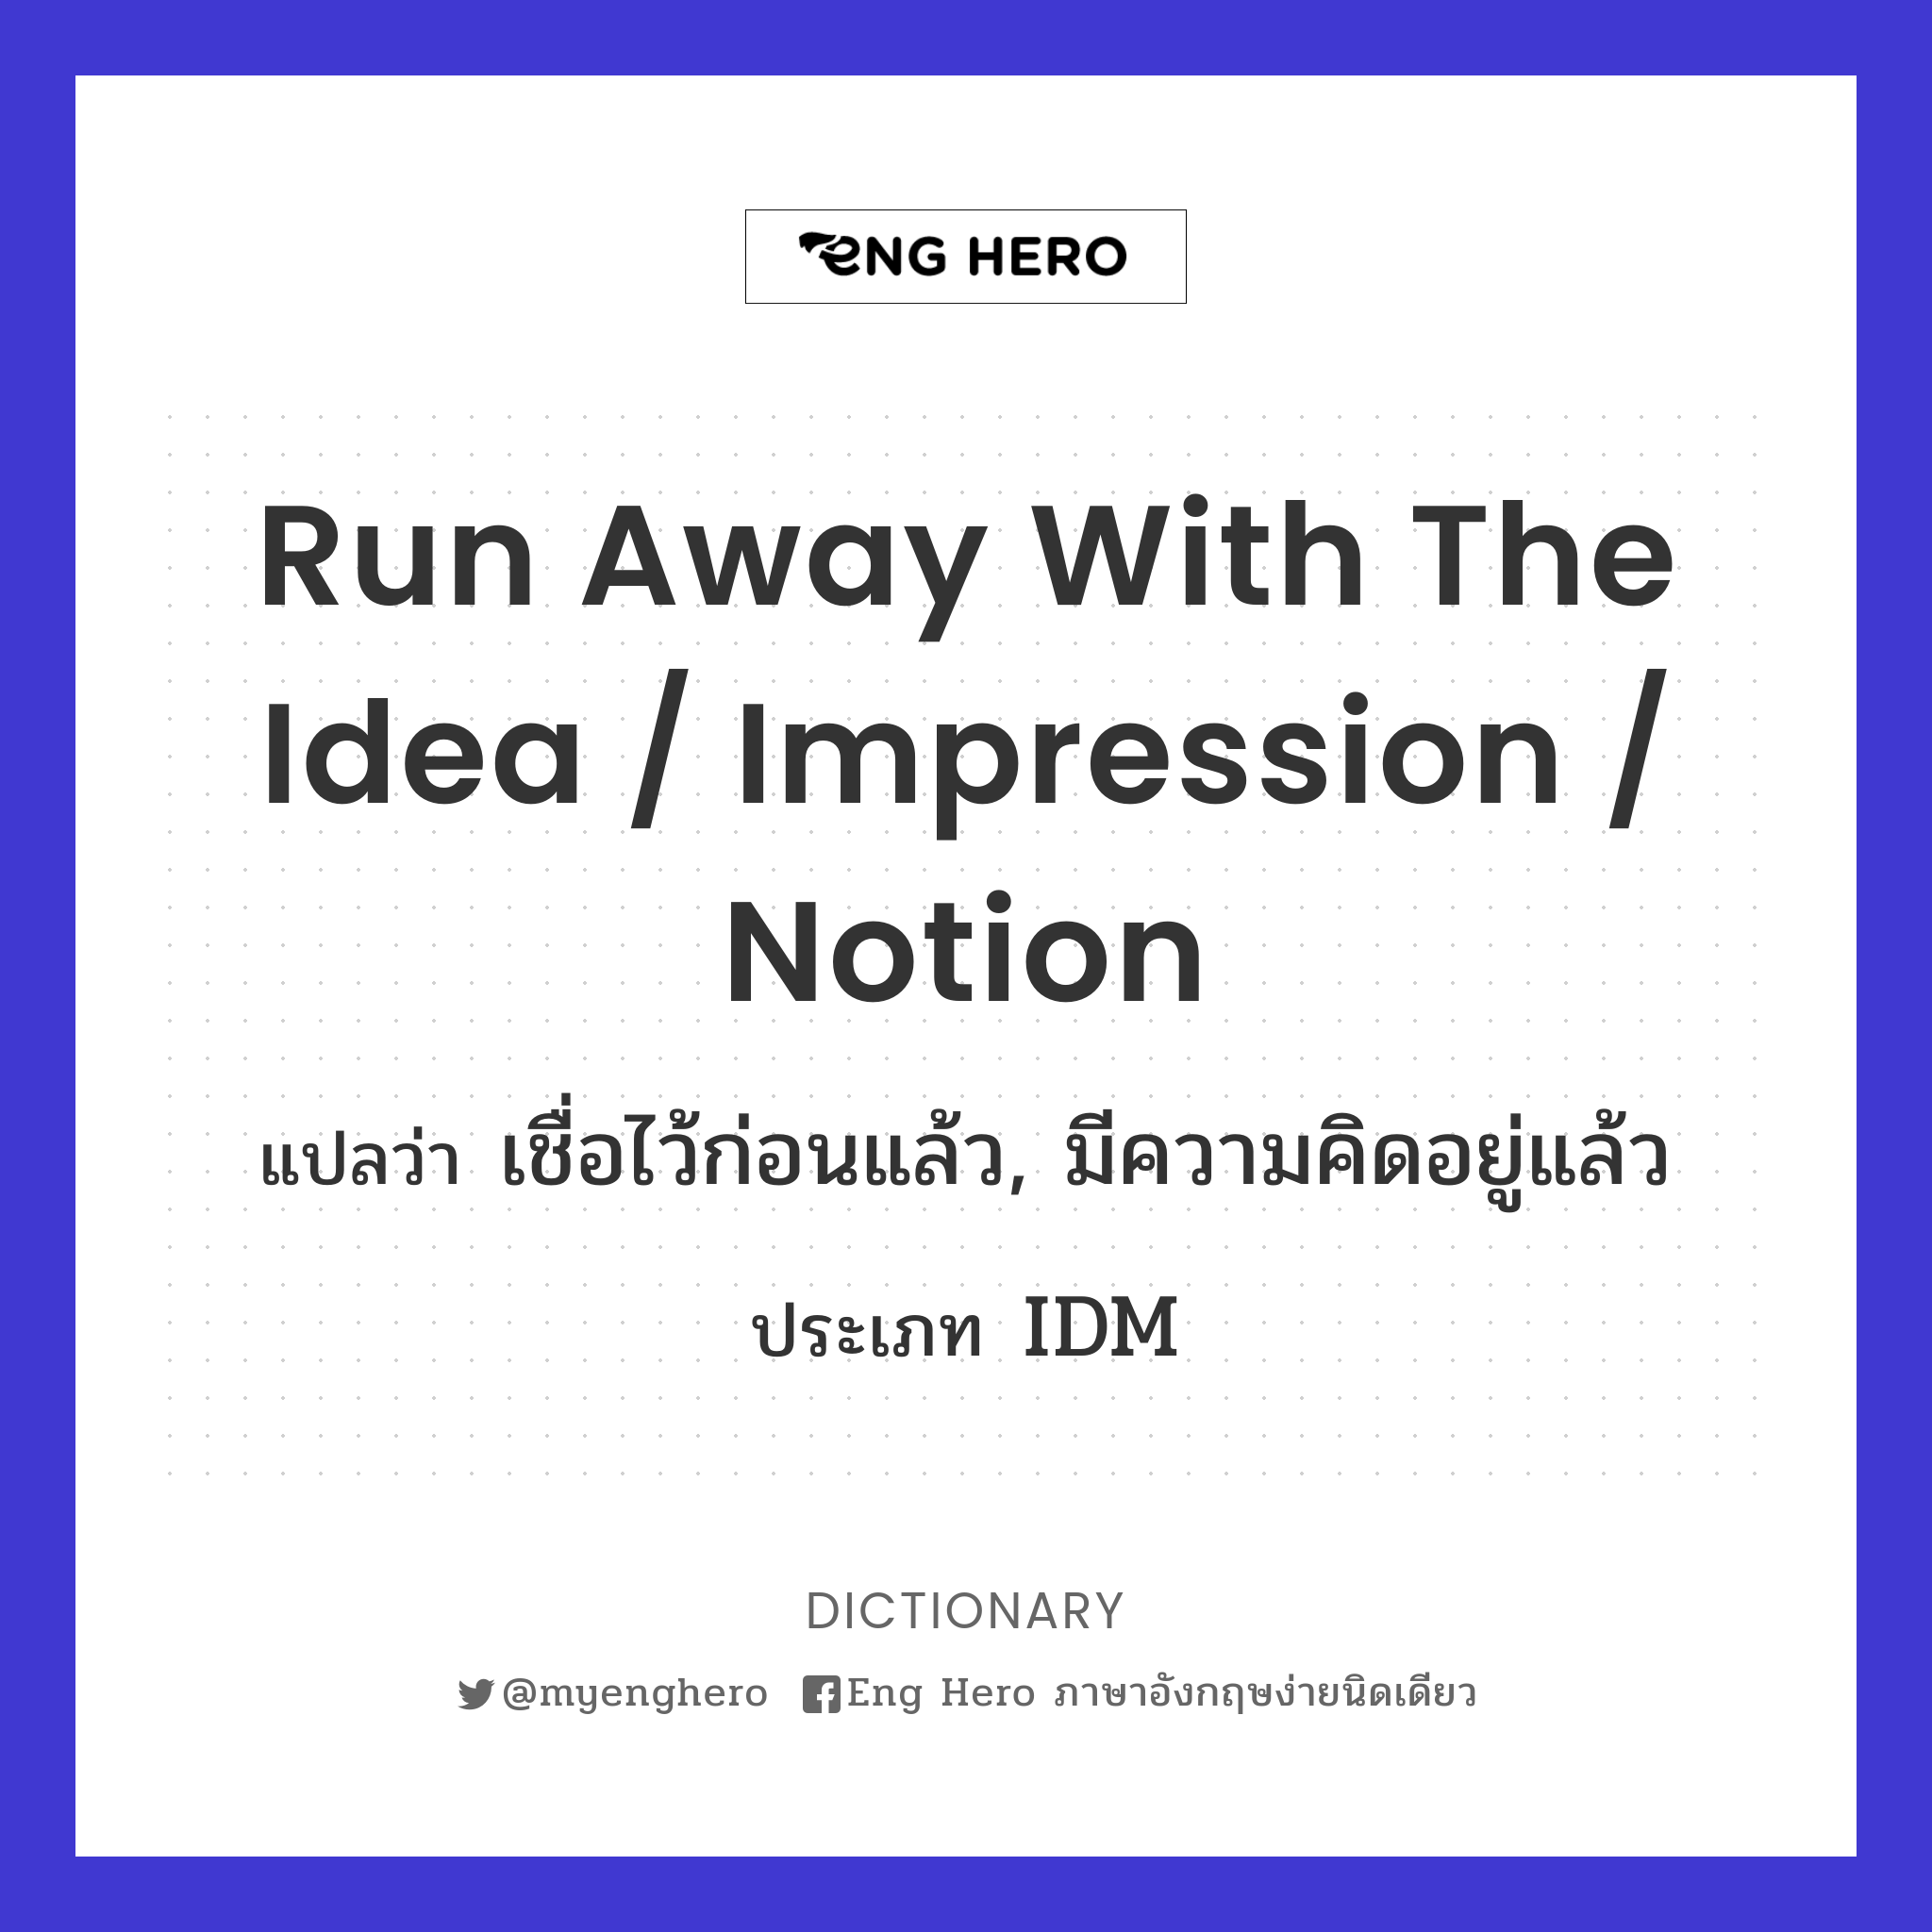 run away with the idea / impression / notion